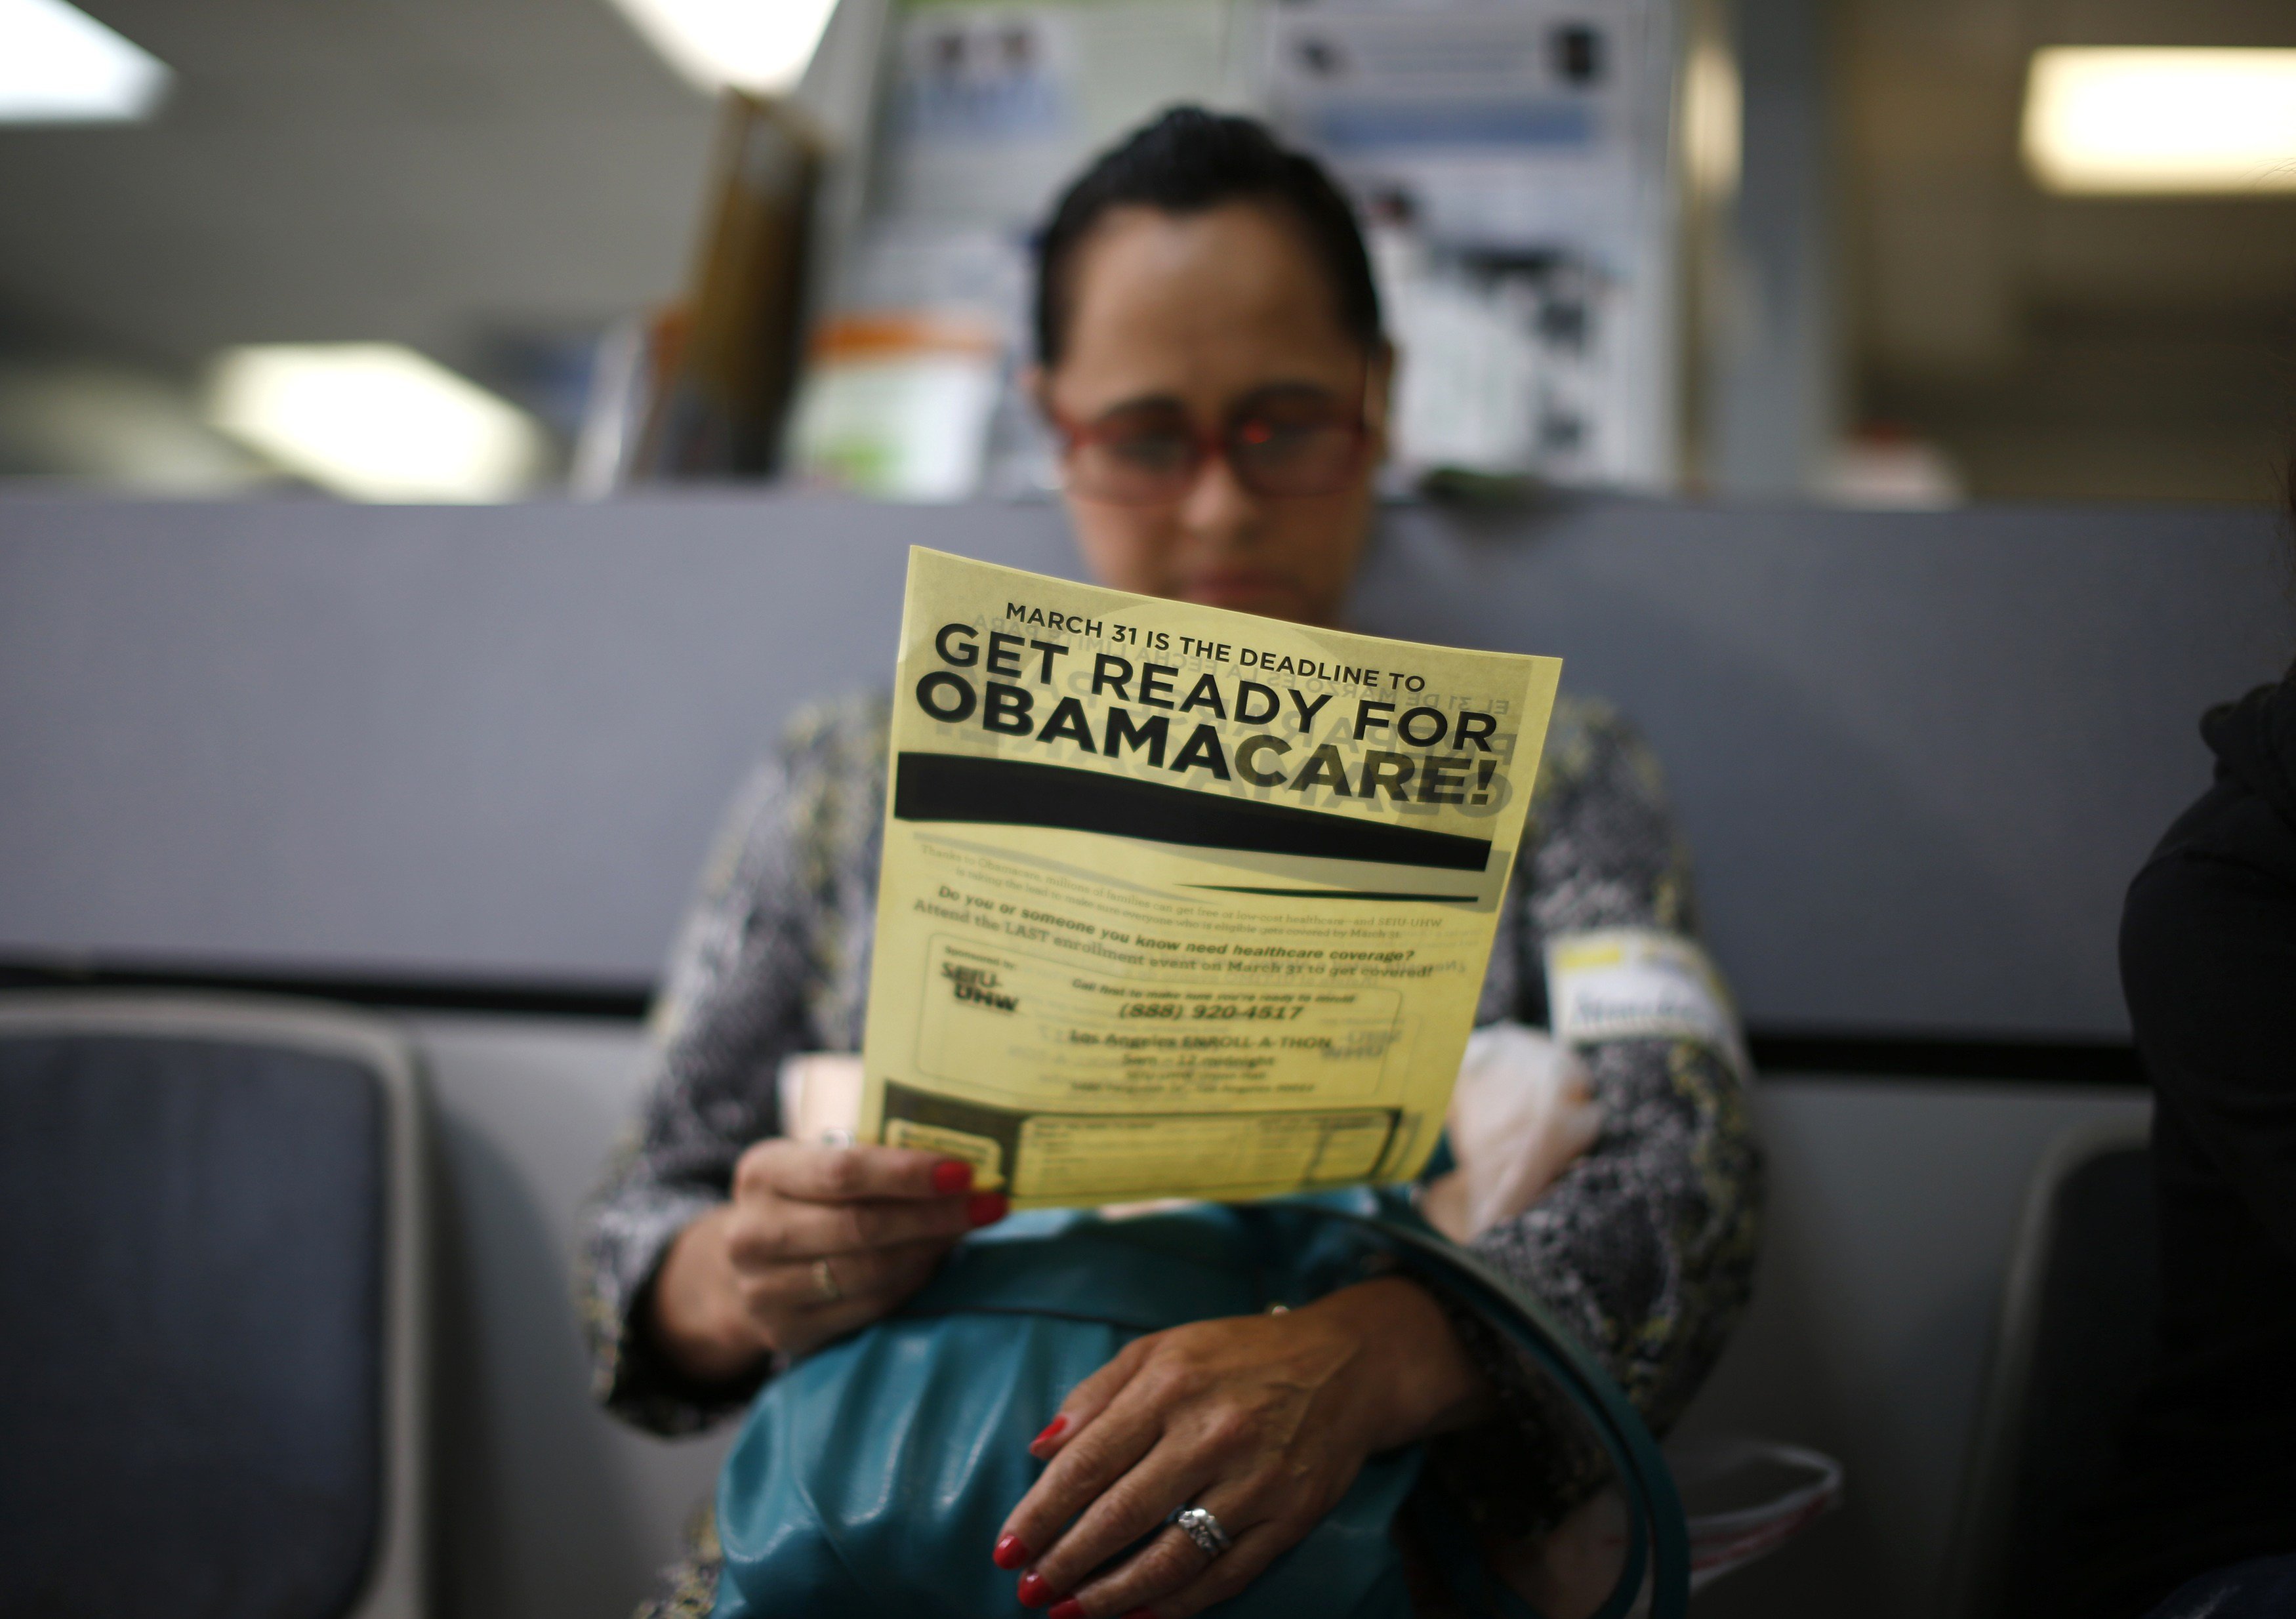 Arminda Murillo, 54, reads a leaflet at a health insurance enrollment event in Cudahy, Calif., on March 27, 2014.